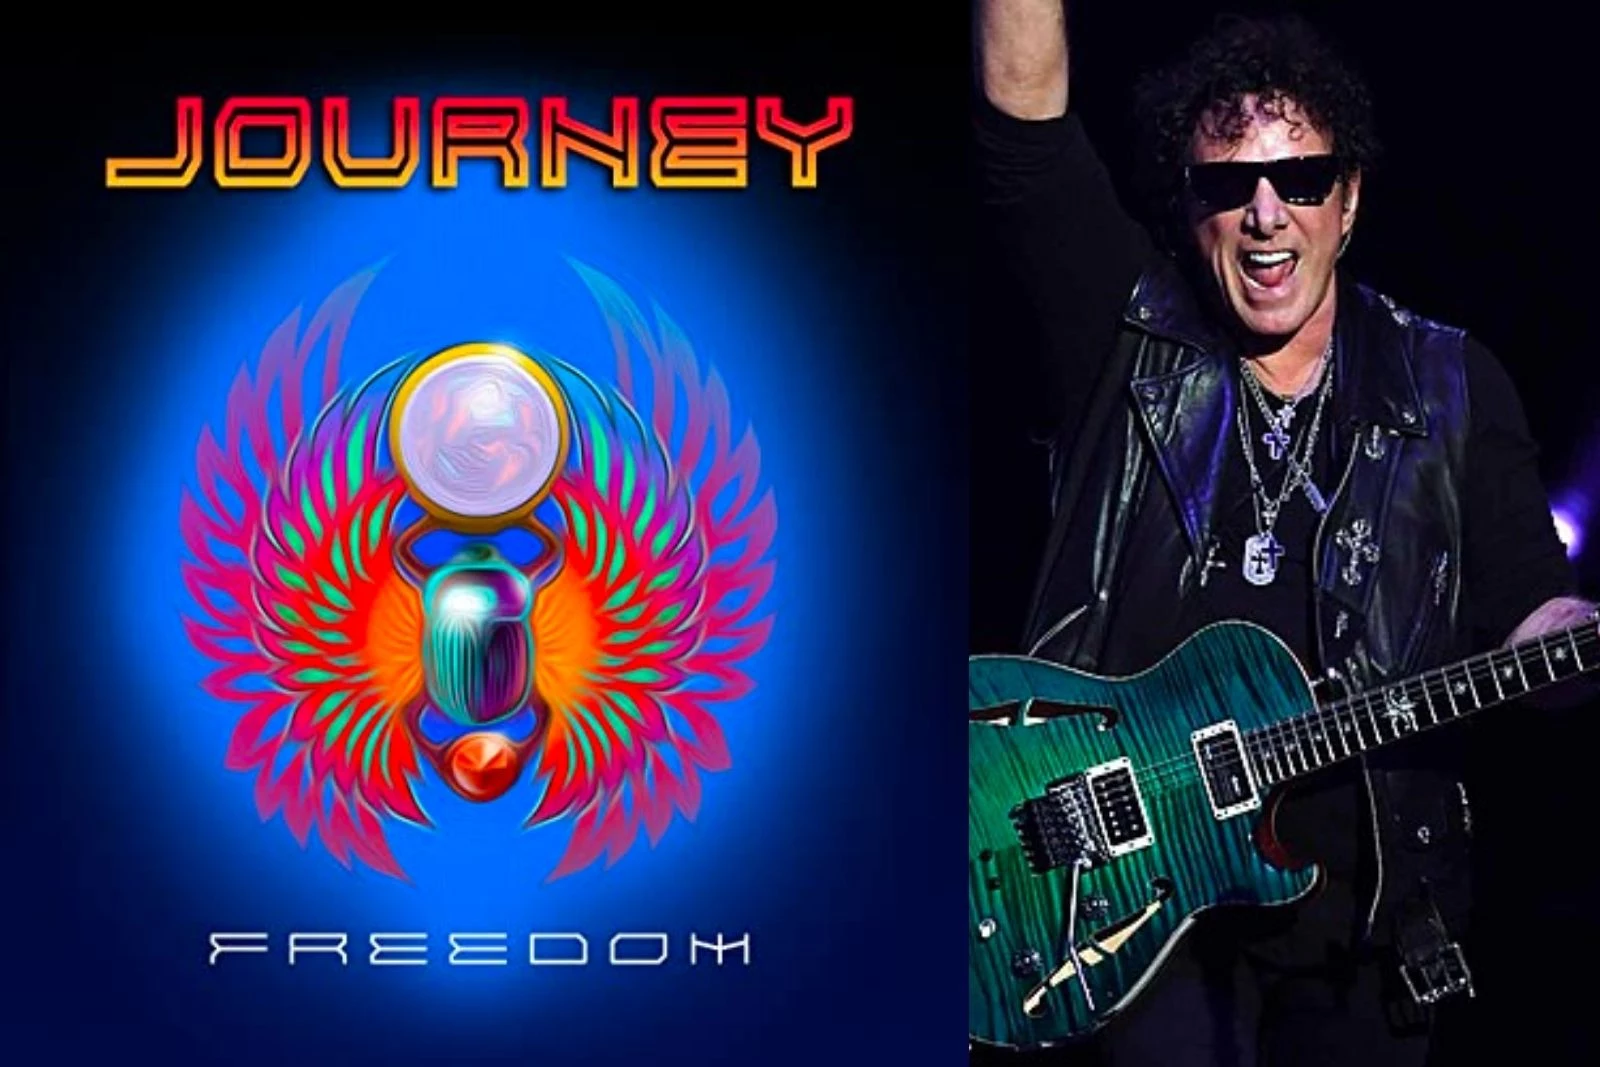 Journey's New 'Freedom' LP: Track List, Cover Art, Release Date